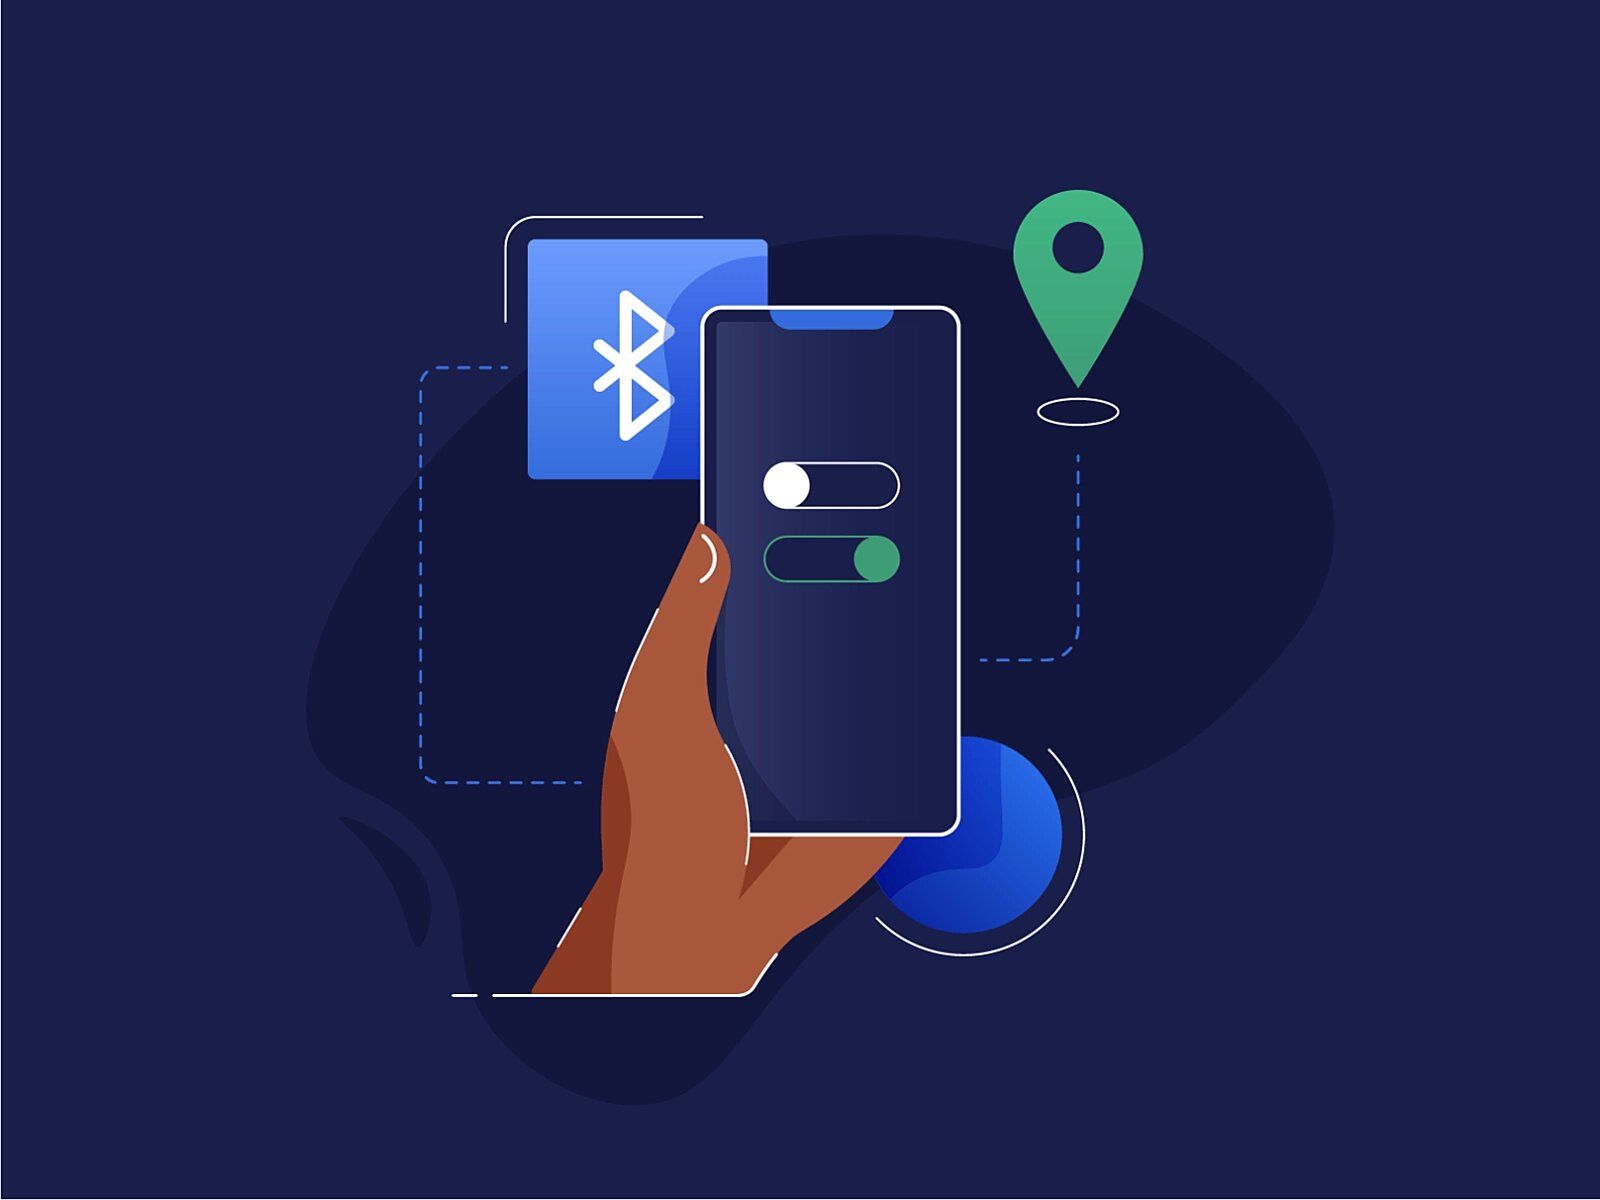 Bluetooth of any type plays a crucial role in developing and connecting IoT applications